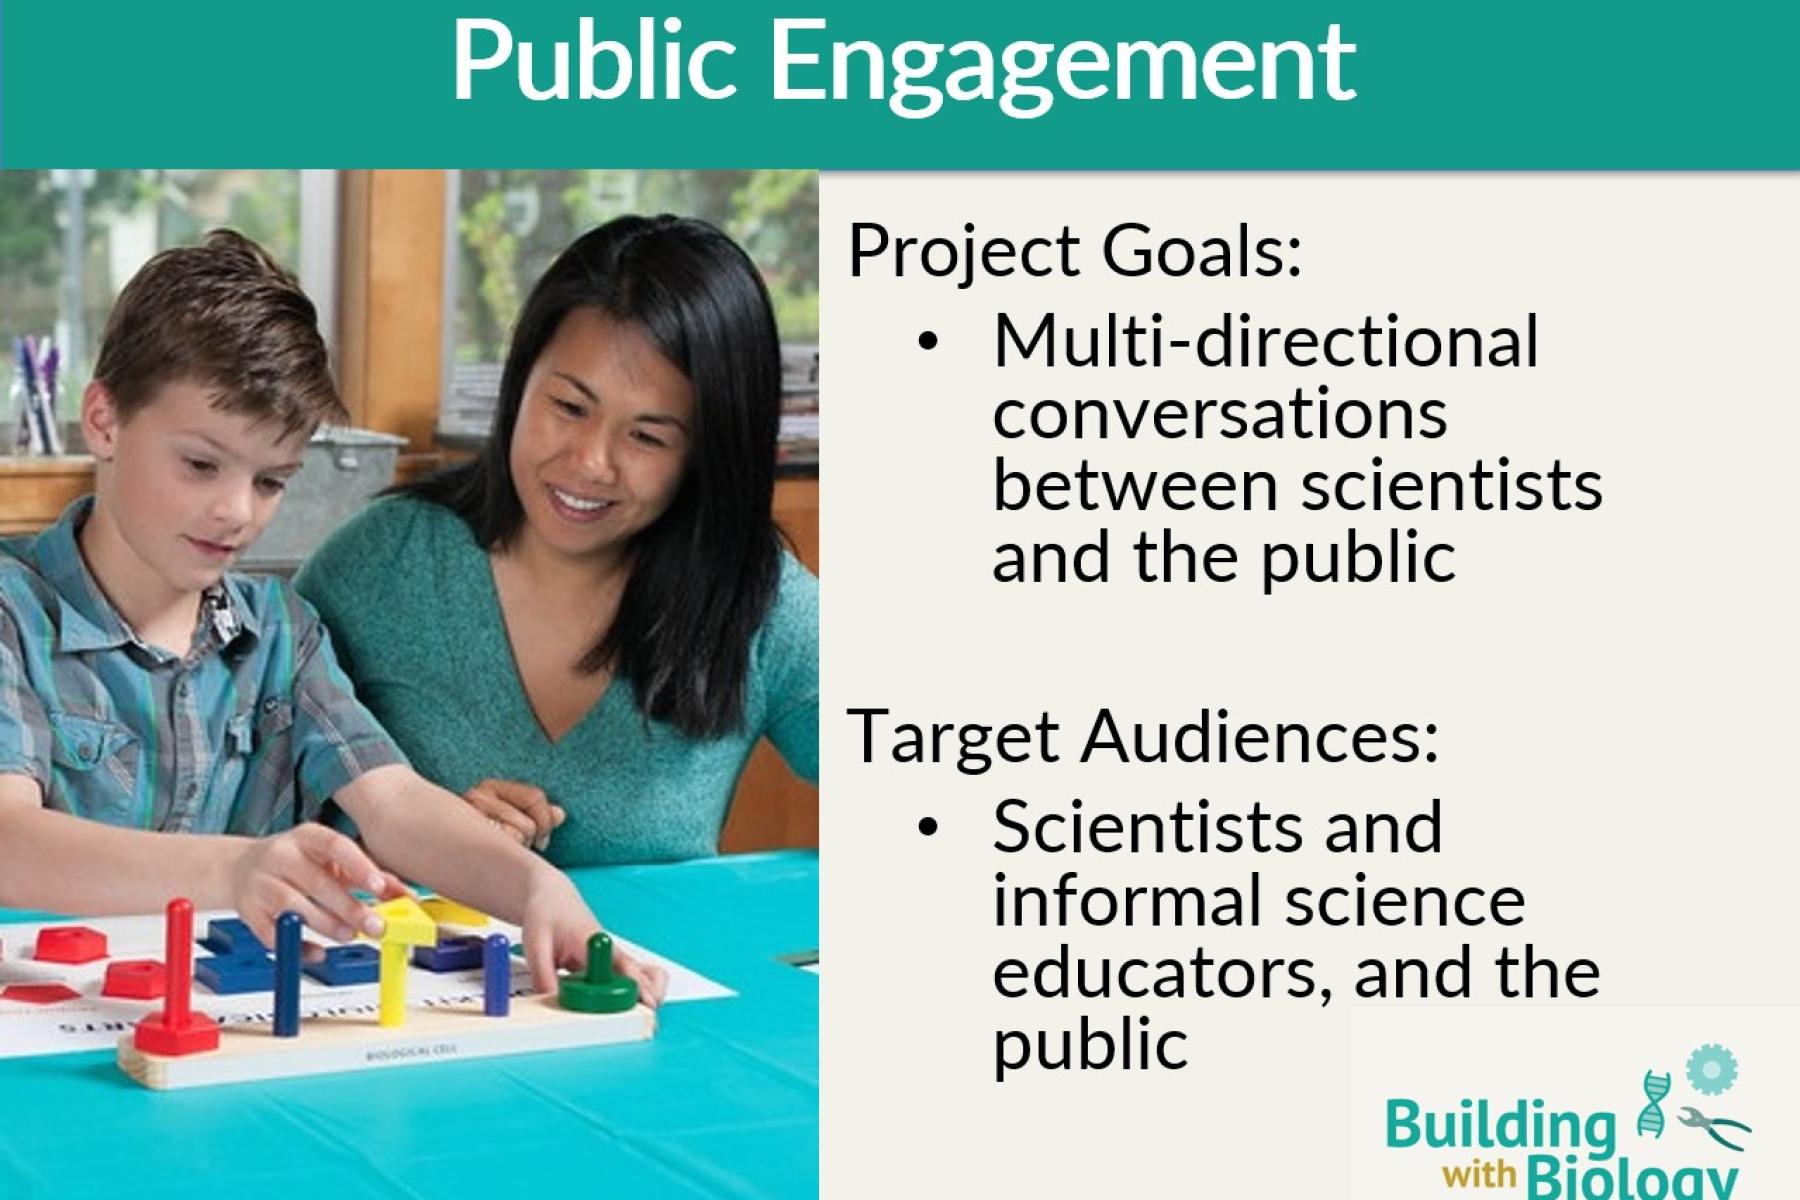 Powerpoint slide discussing Public Engagement tips